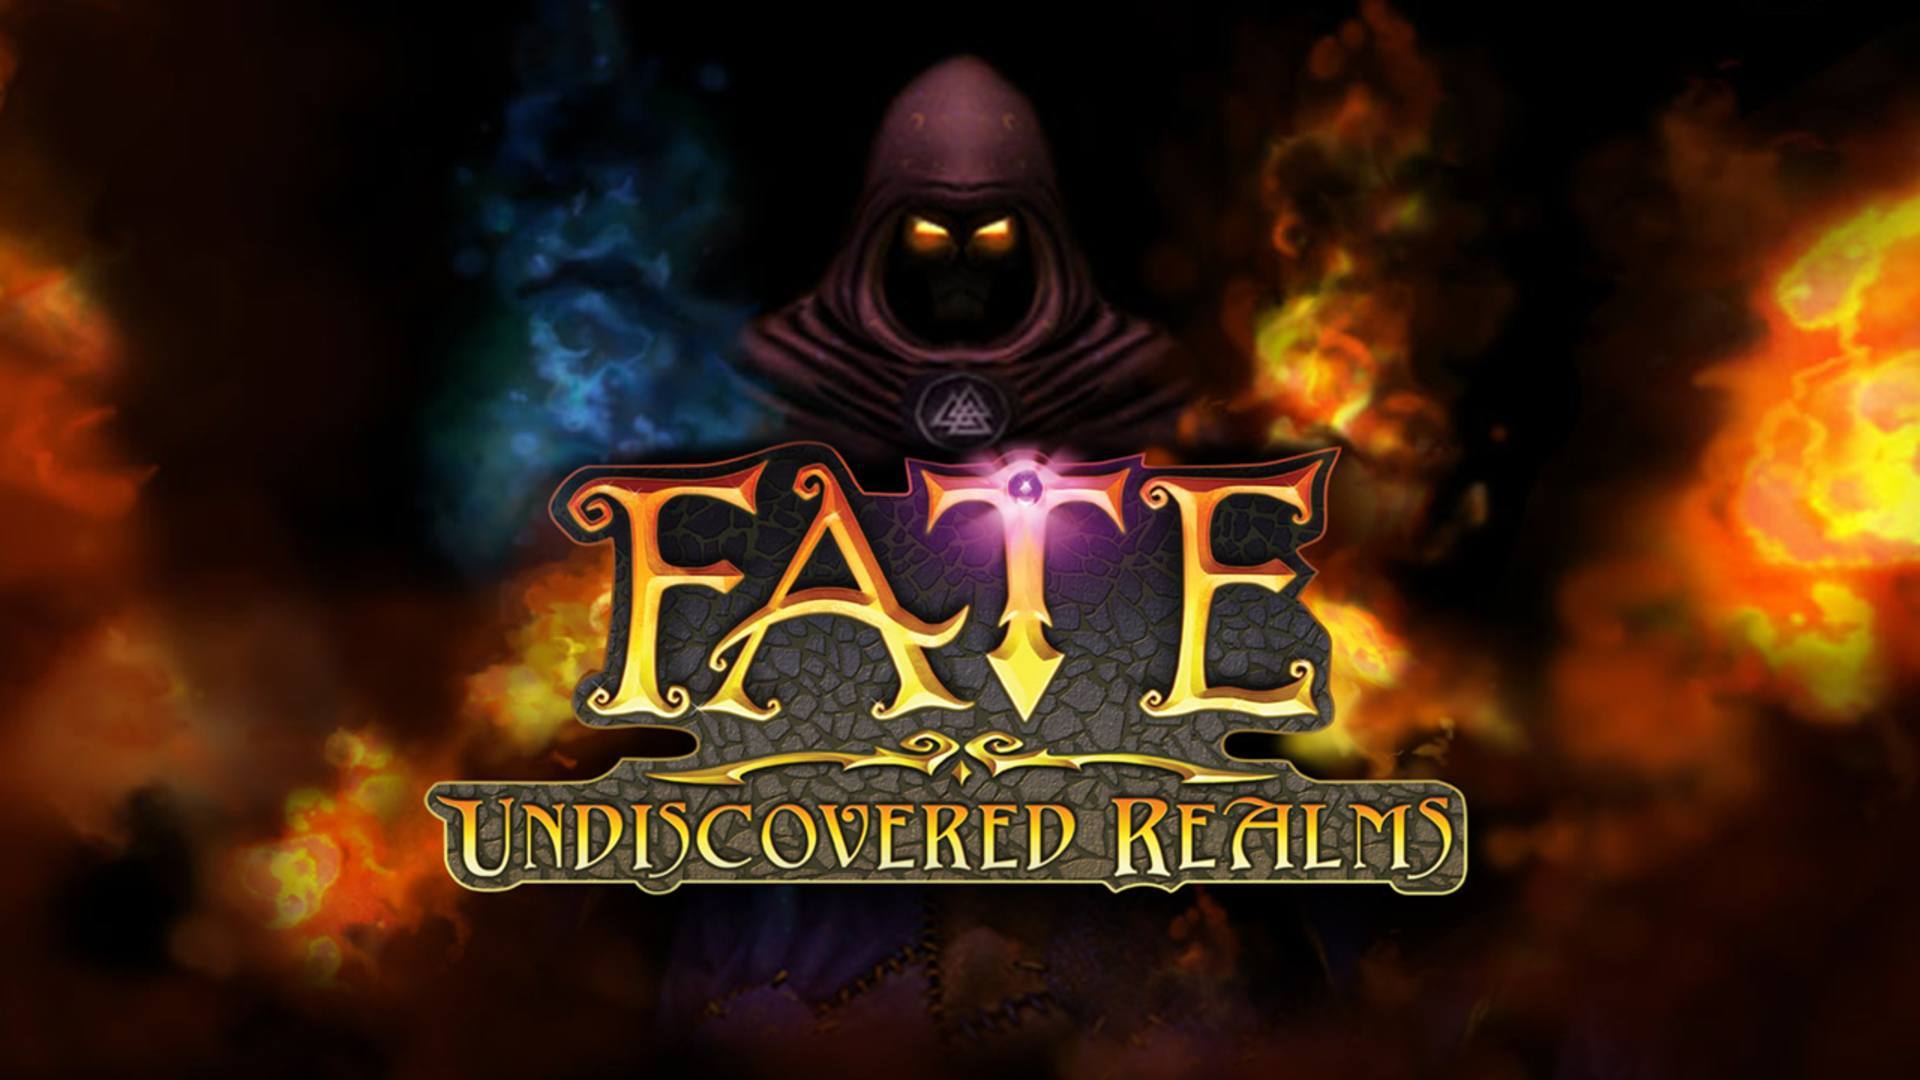 fate undiscovered realms pc